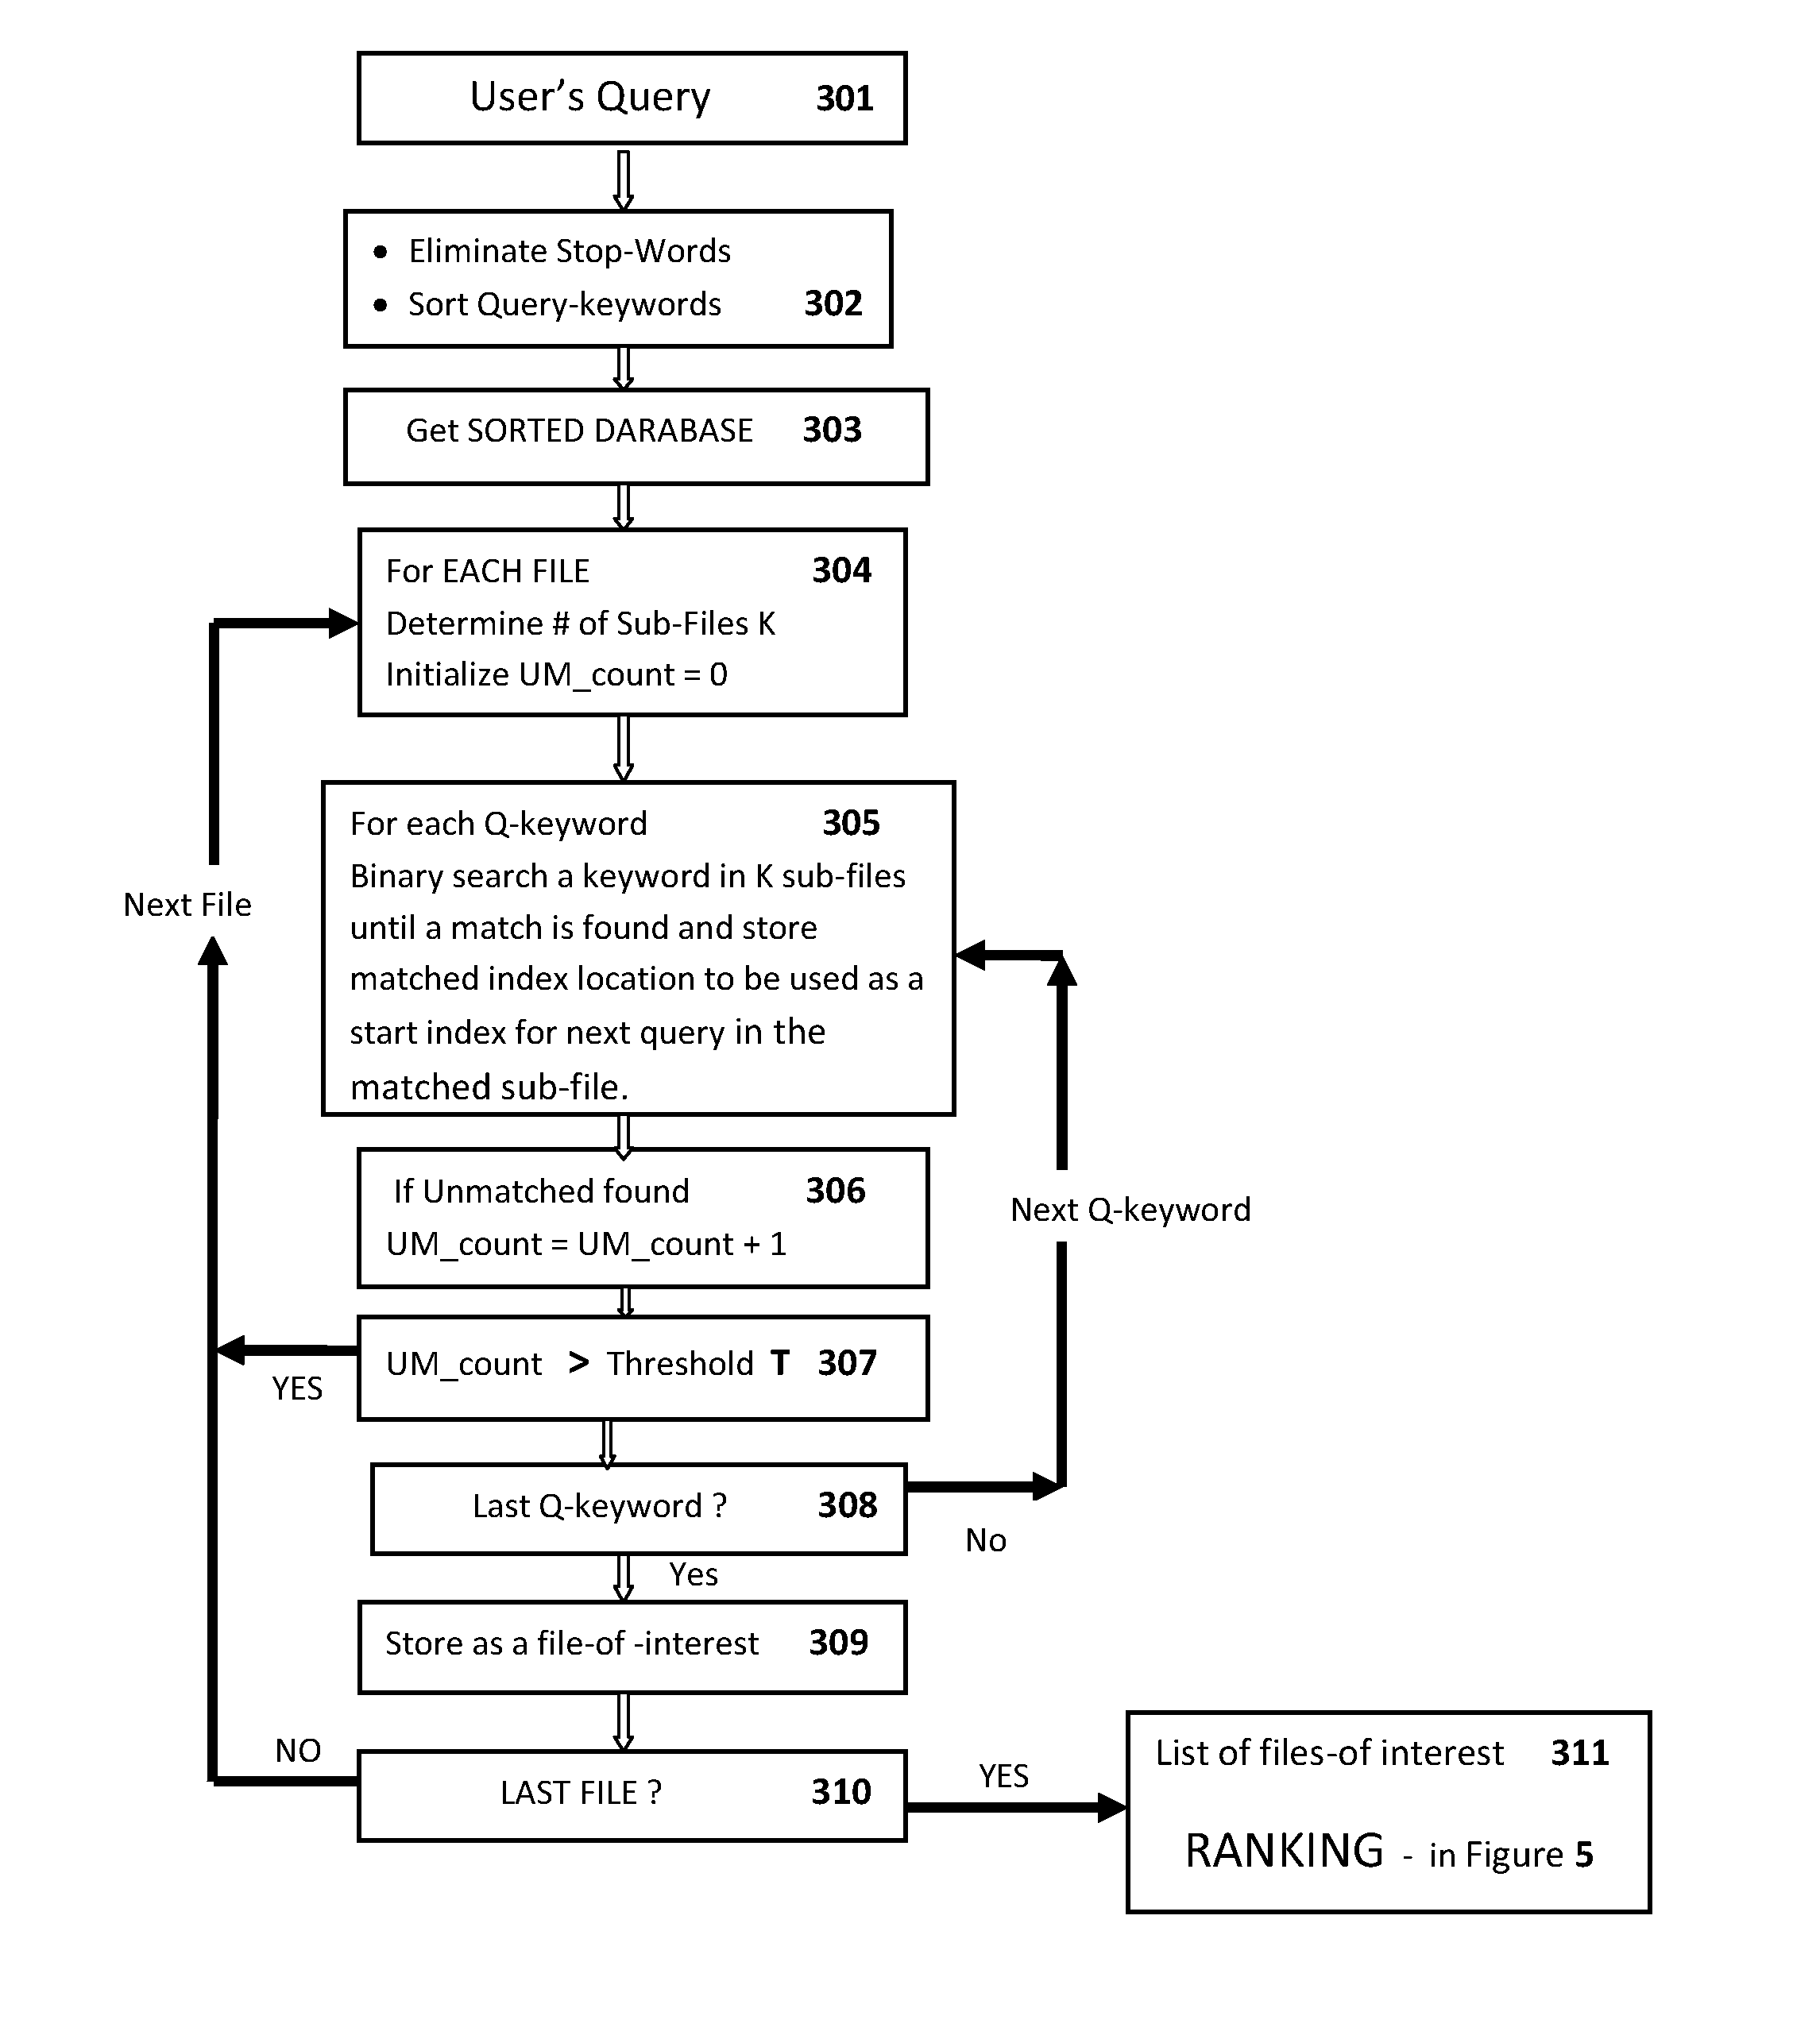 Apparatus and method for information access, search, rank and retrieval